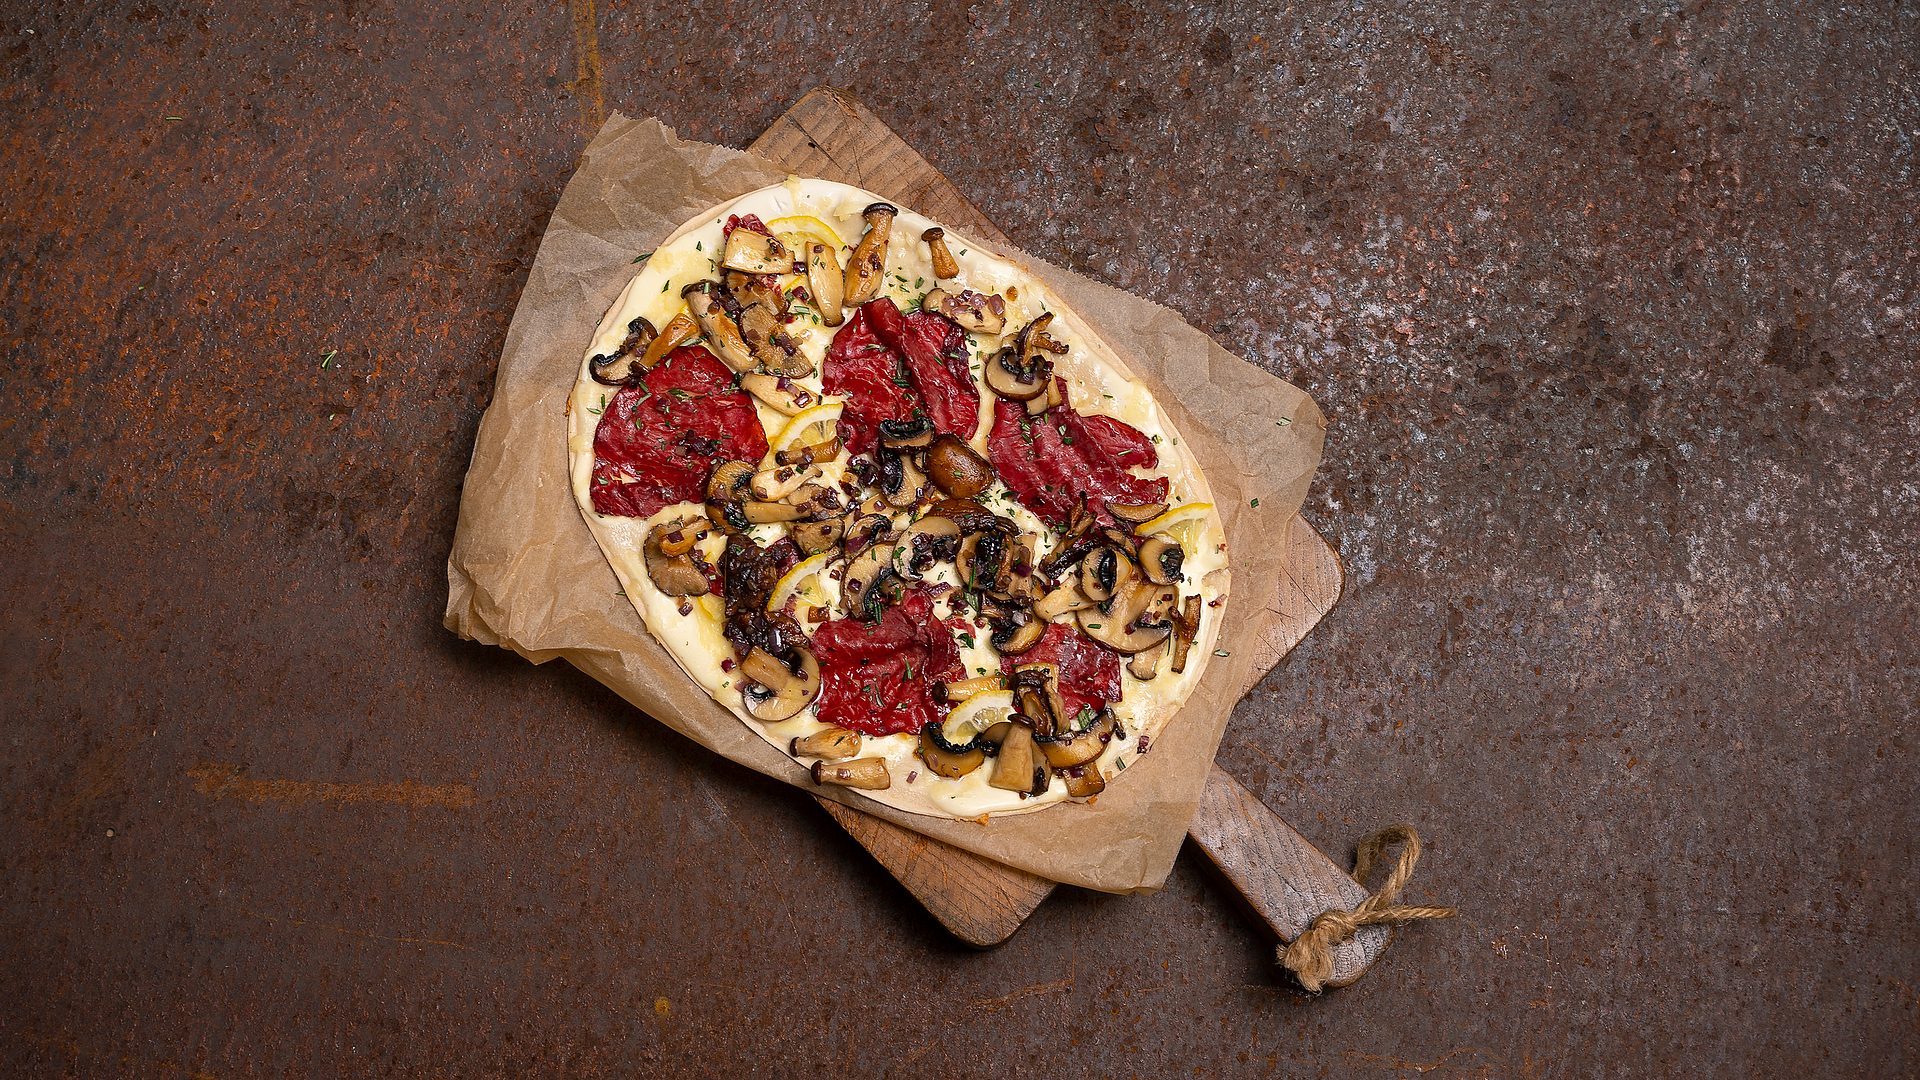 Tarte flambée with mushrooms and cheese